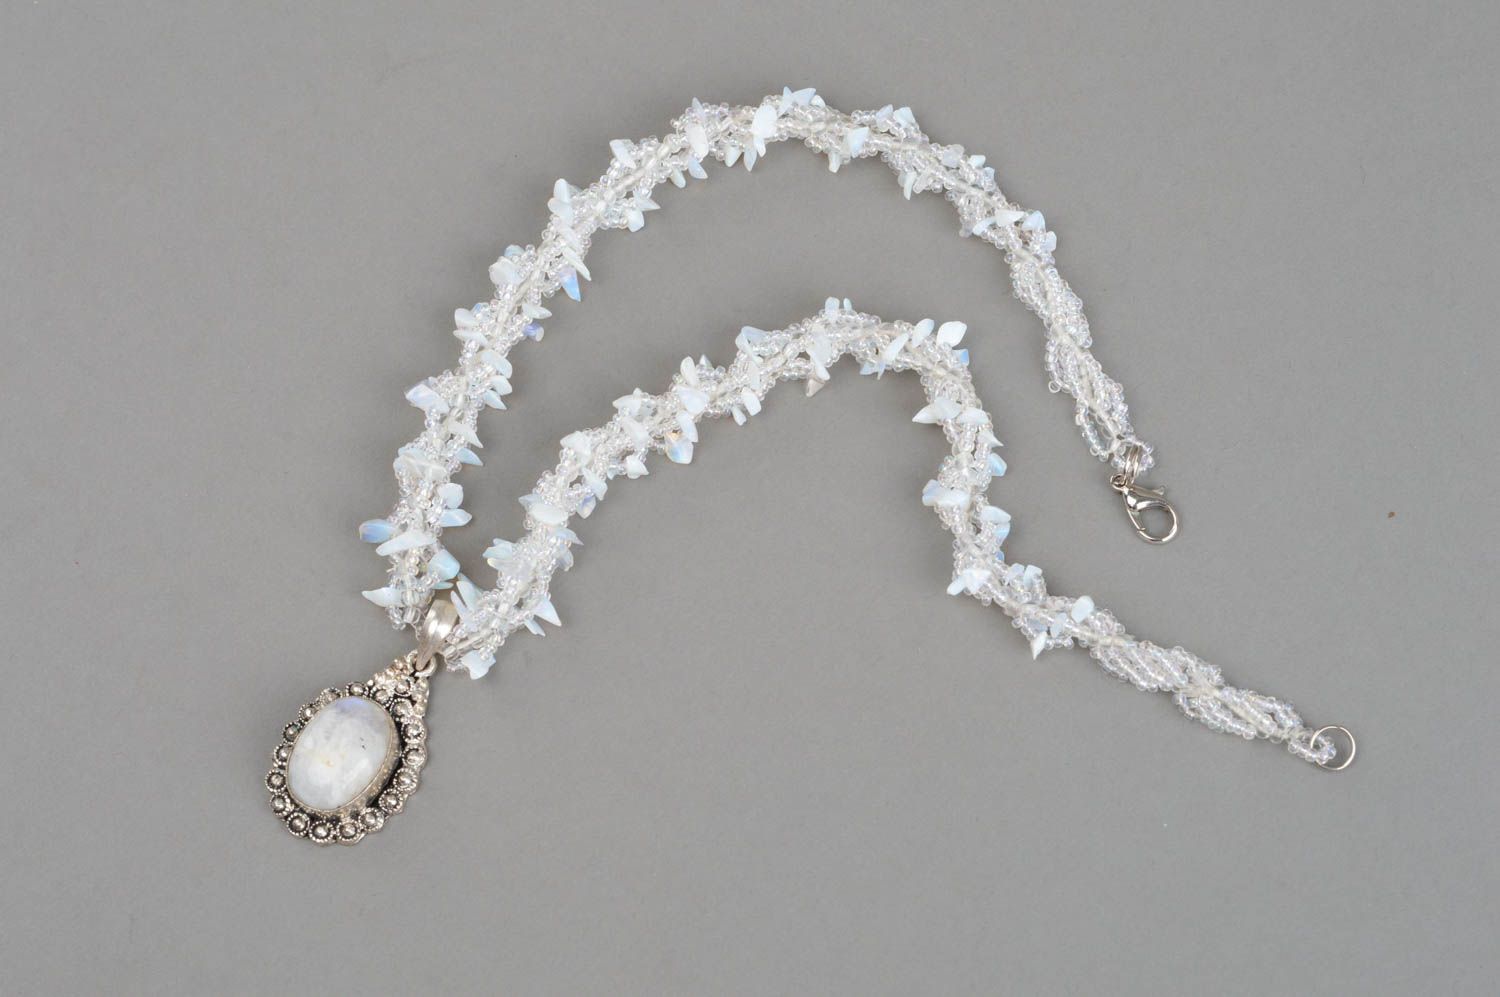 Moonstone necklace with beads handmade stylish accessory natural stones jewelry photo 3